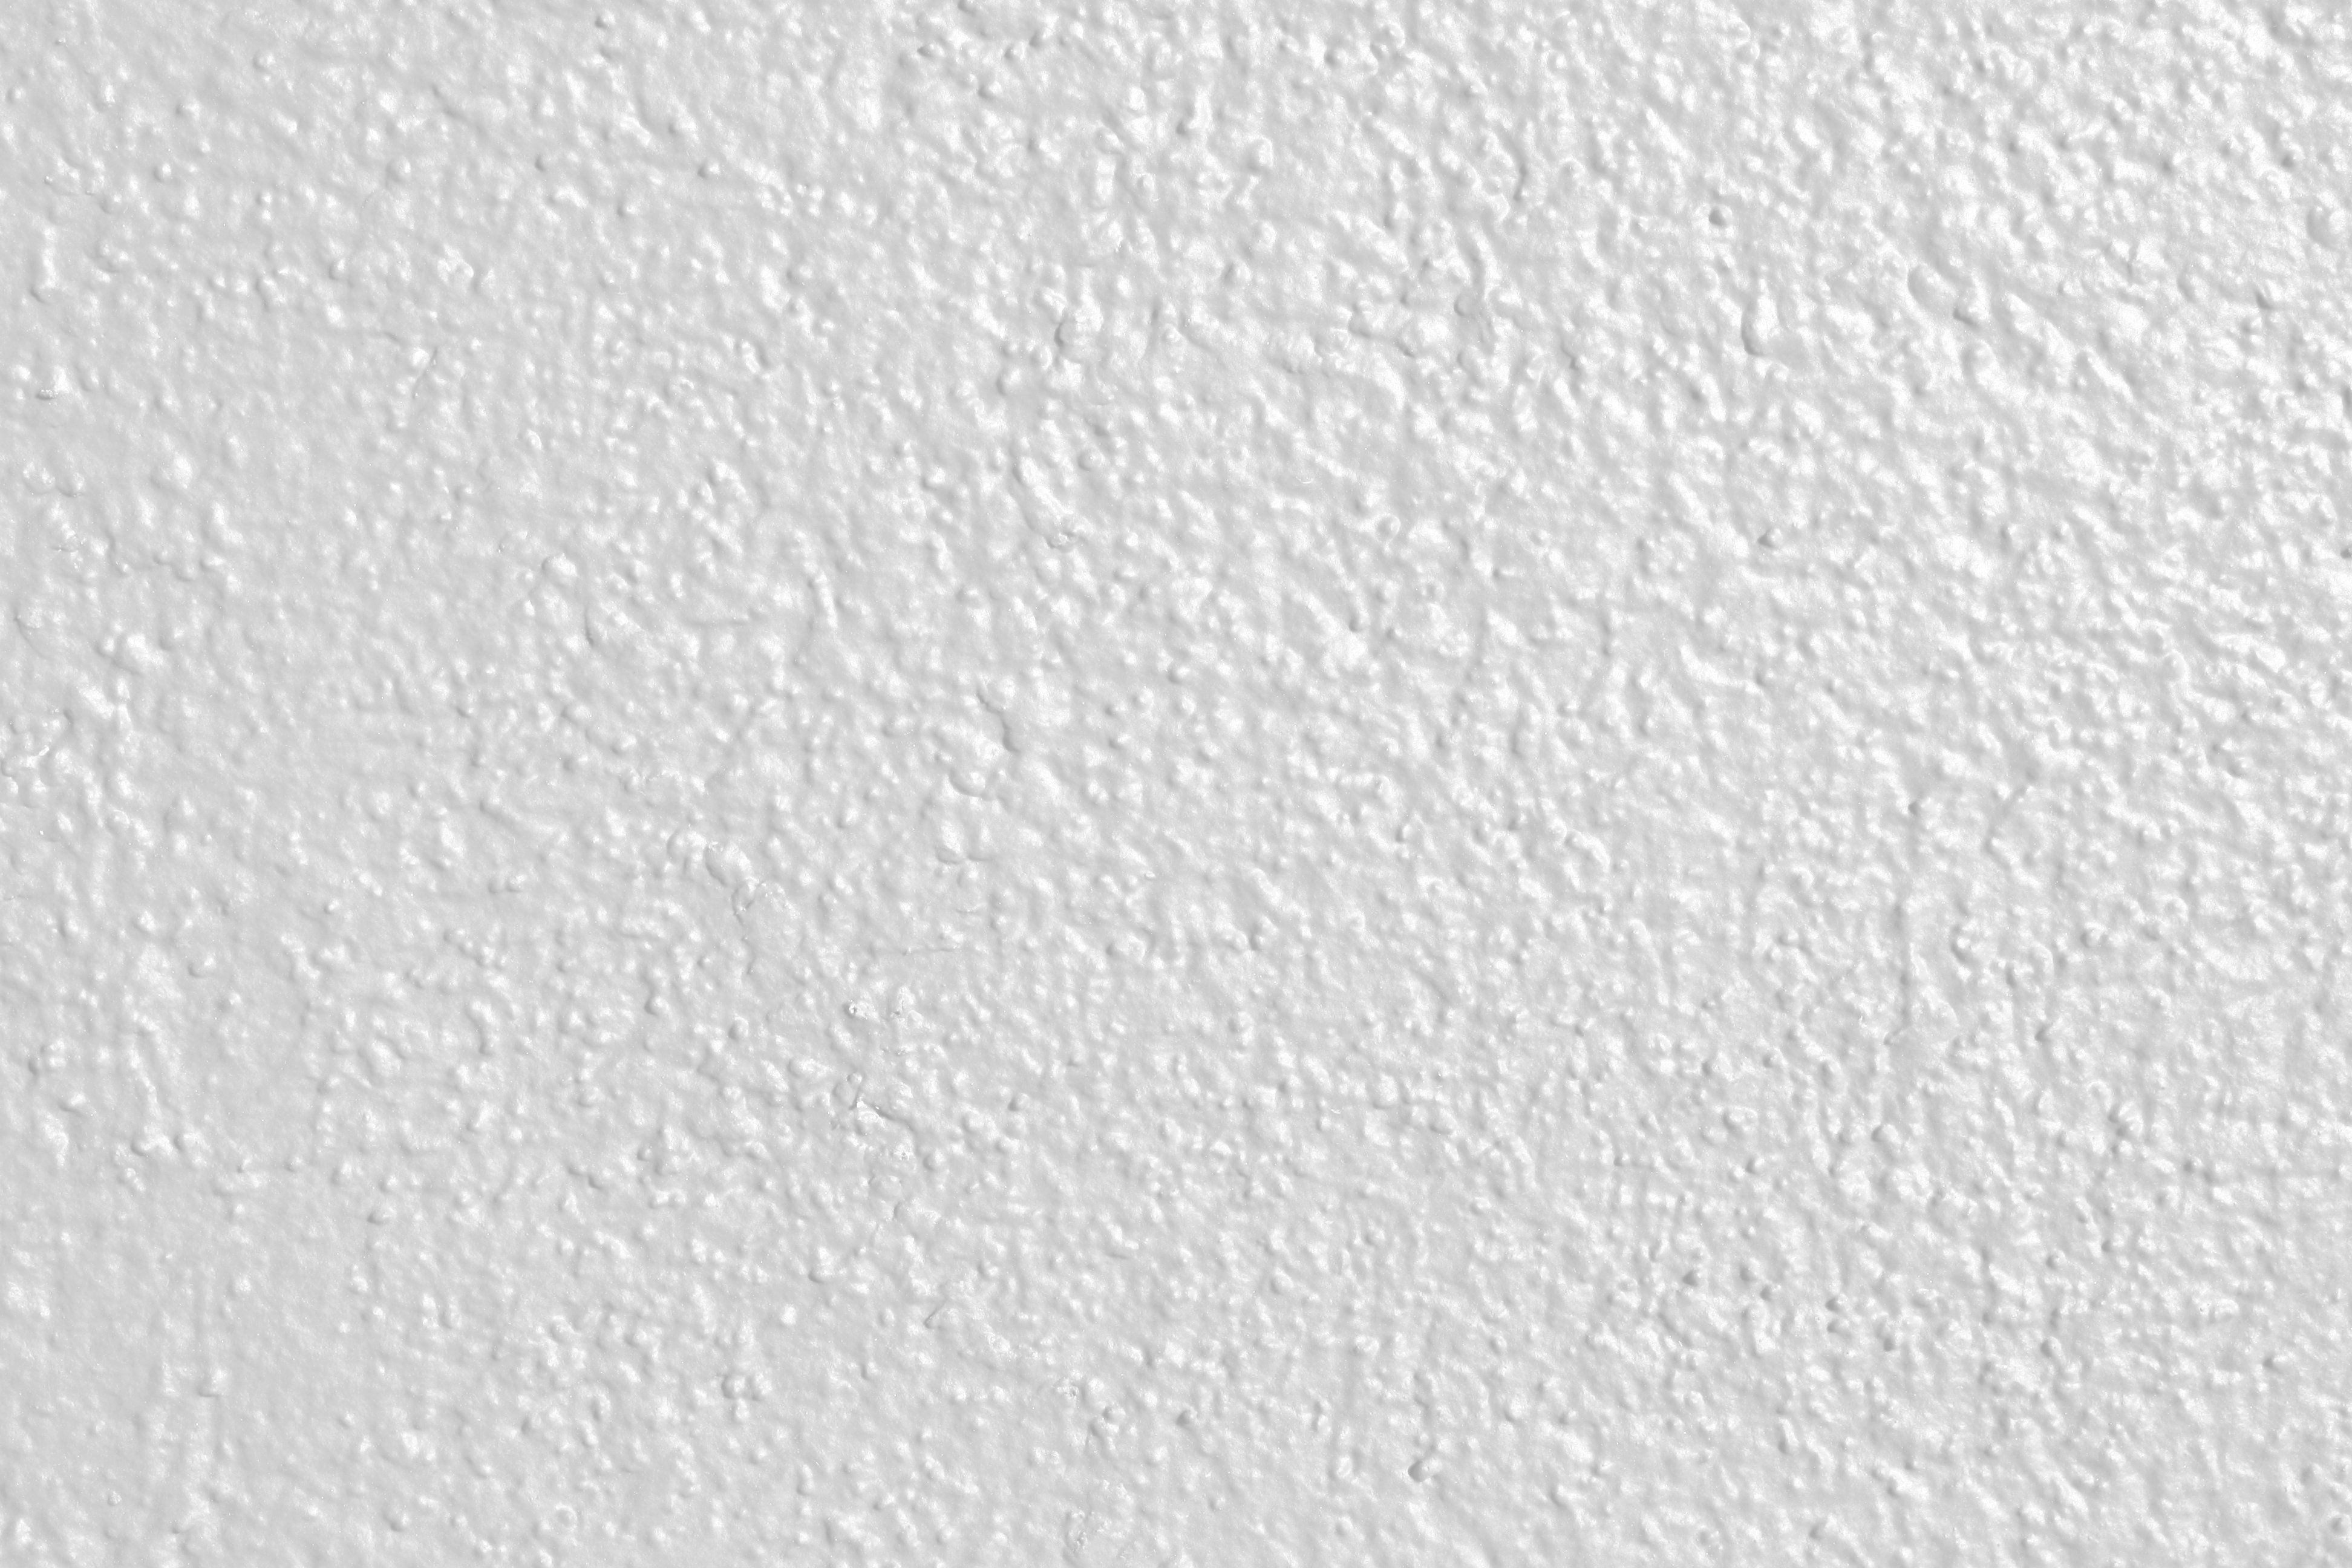 White Painted Wall Texture | Blanco | Pinterest | Wall textures ...